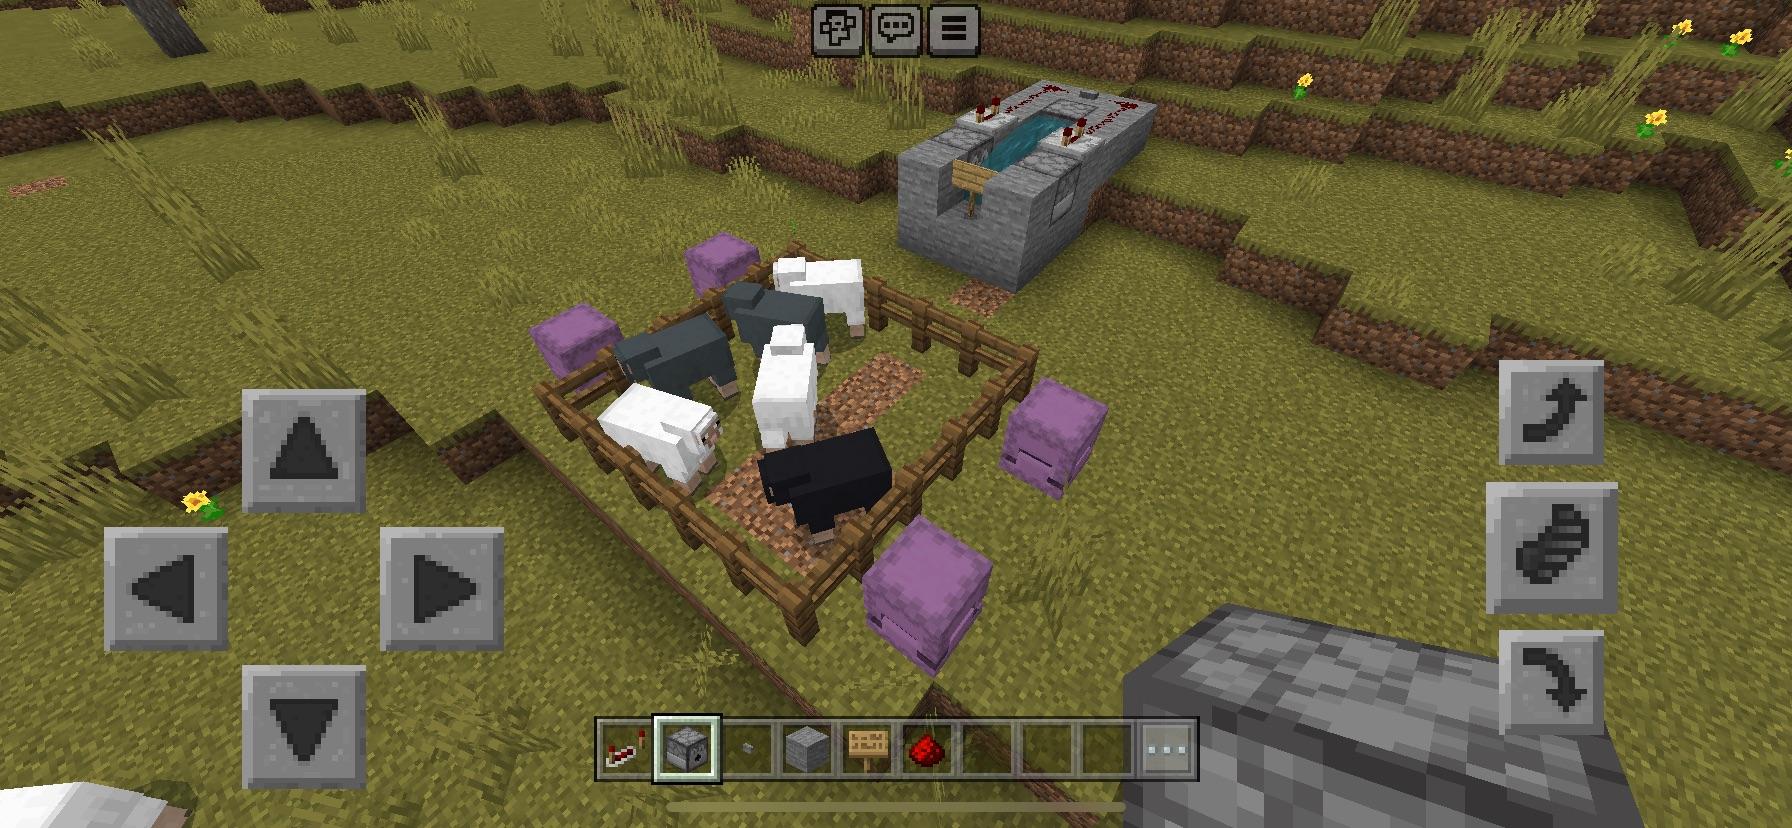 Minecraft Memes - "Shulker AA and TNT save sheep from paratrooping wolves"